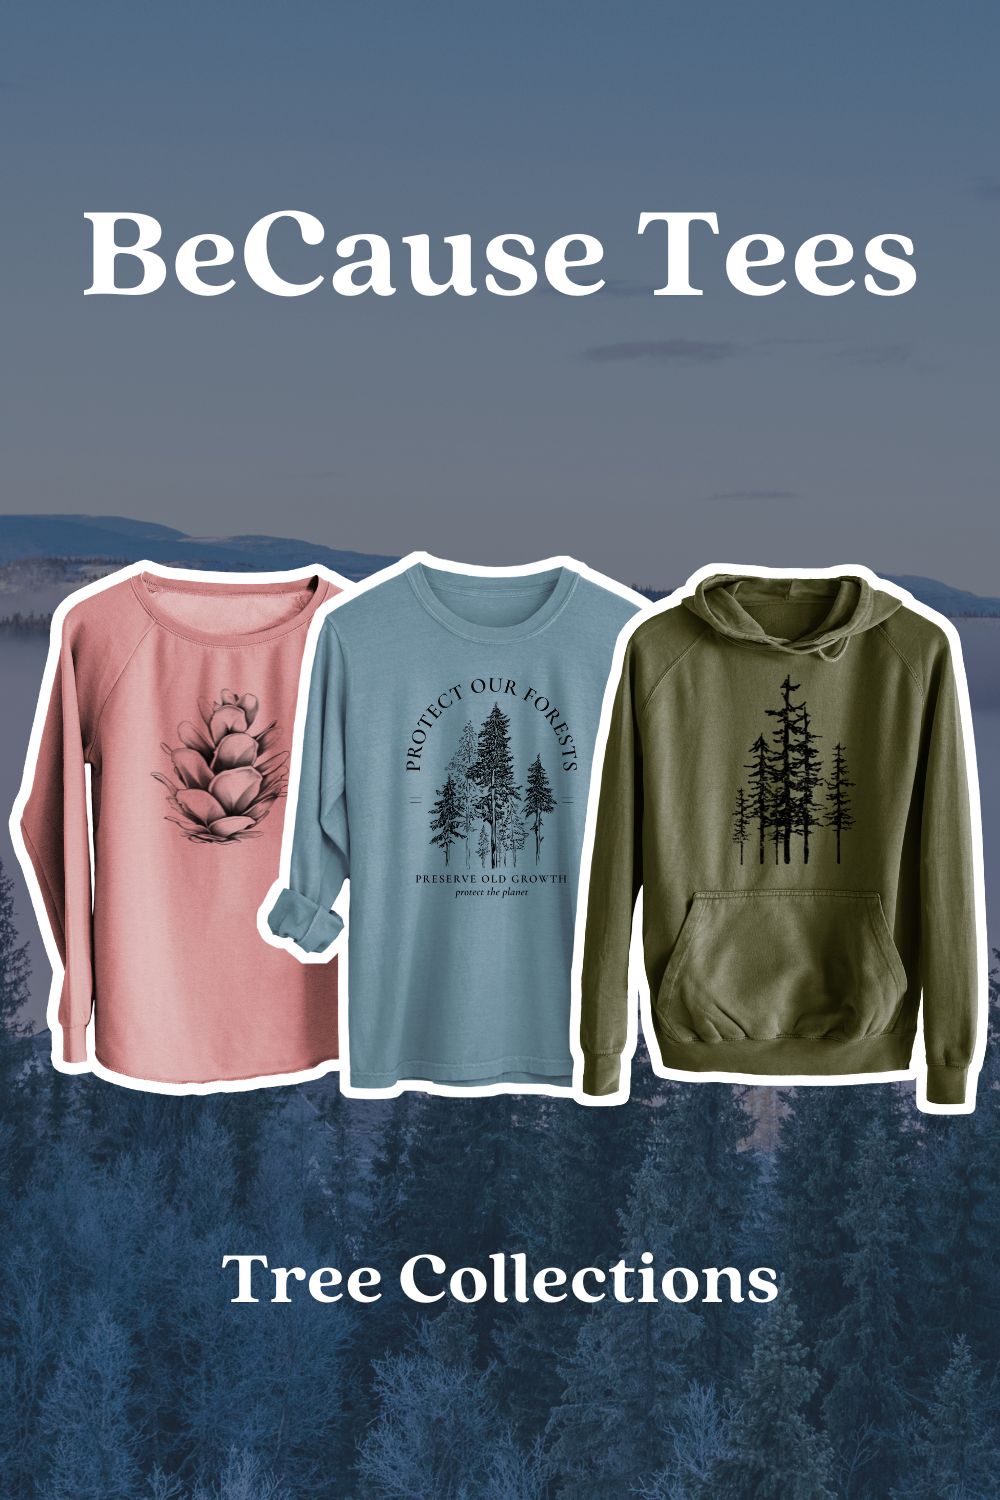 Tree clothing and gifts